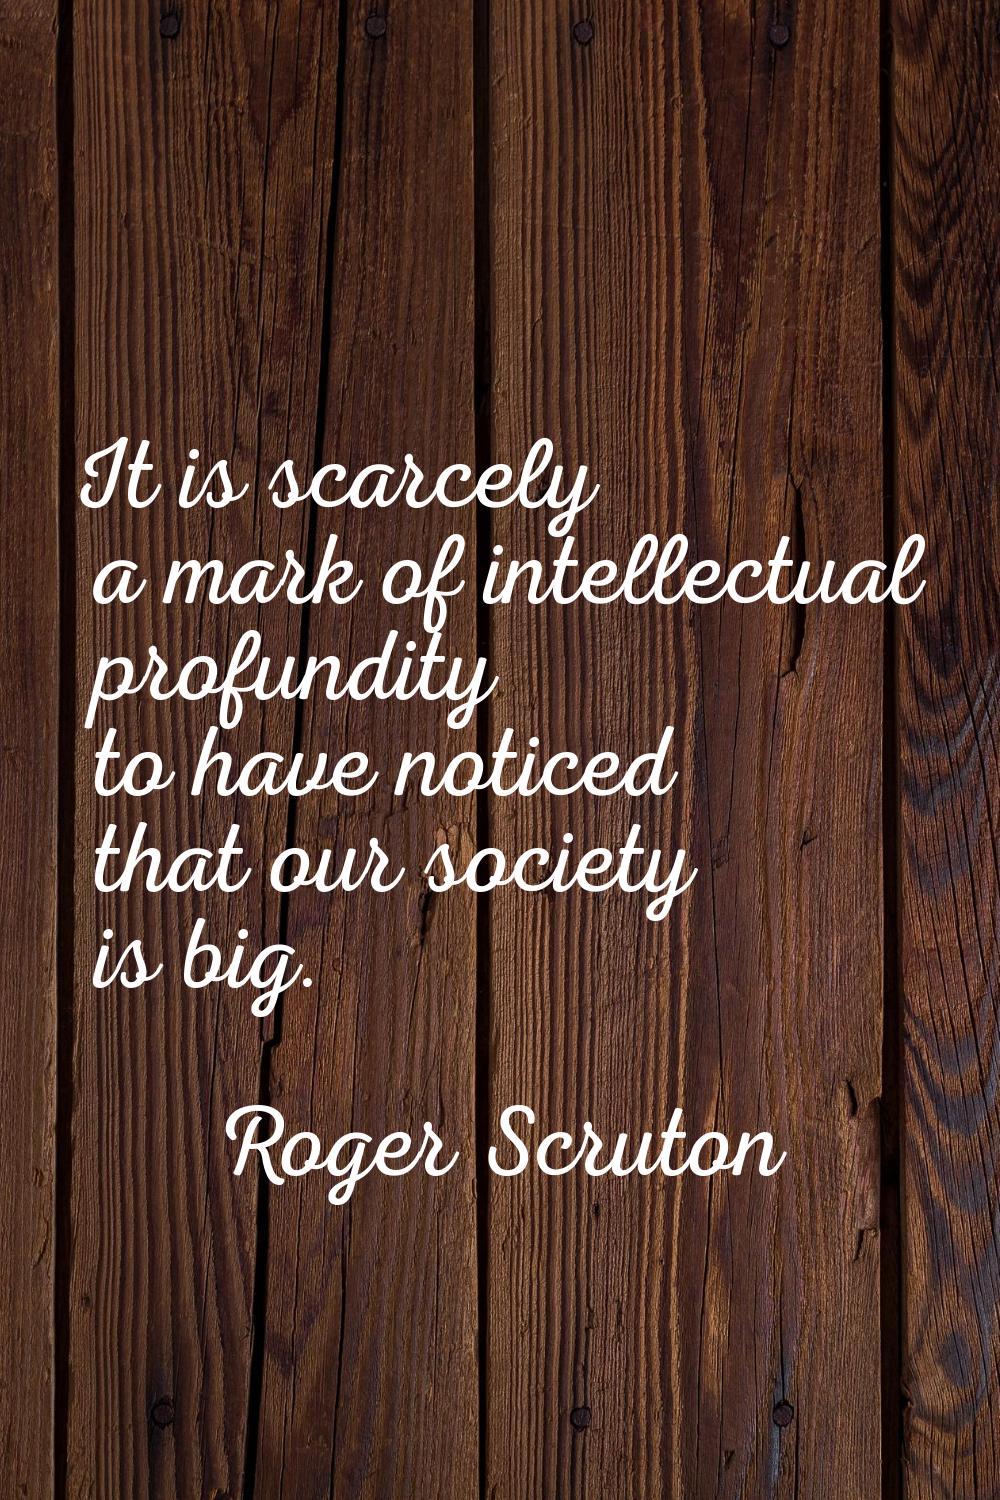 It is scarcely a mark of intellectual profundity to have noticed that our society is big.